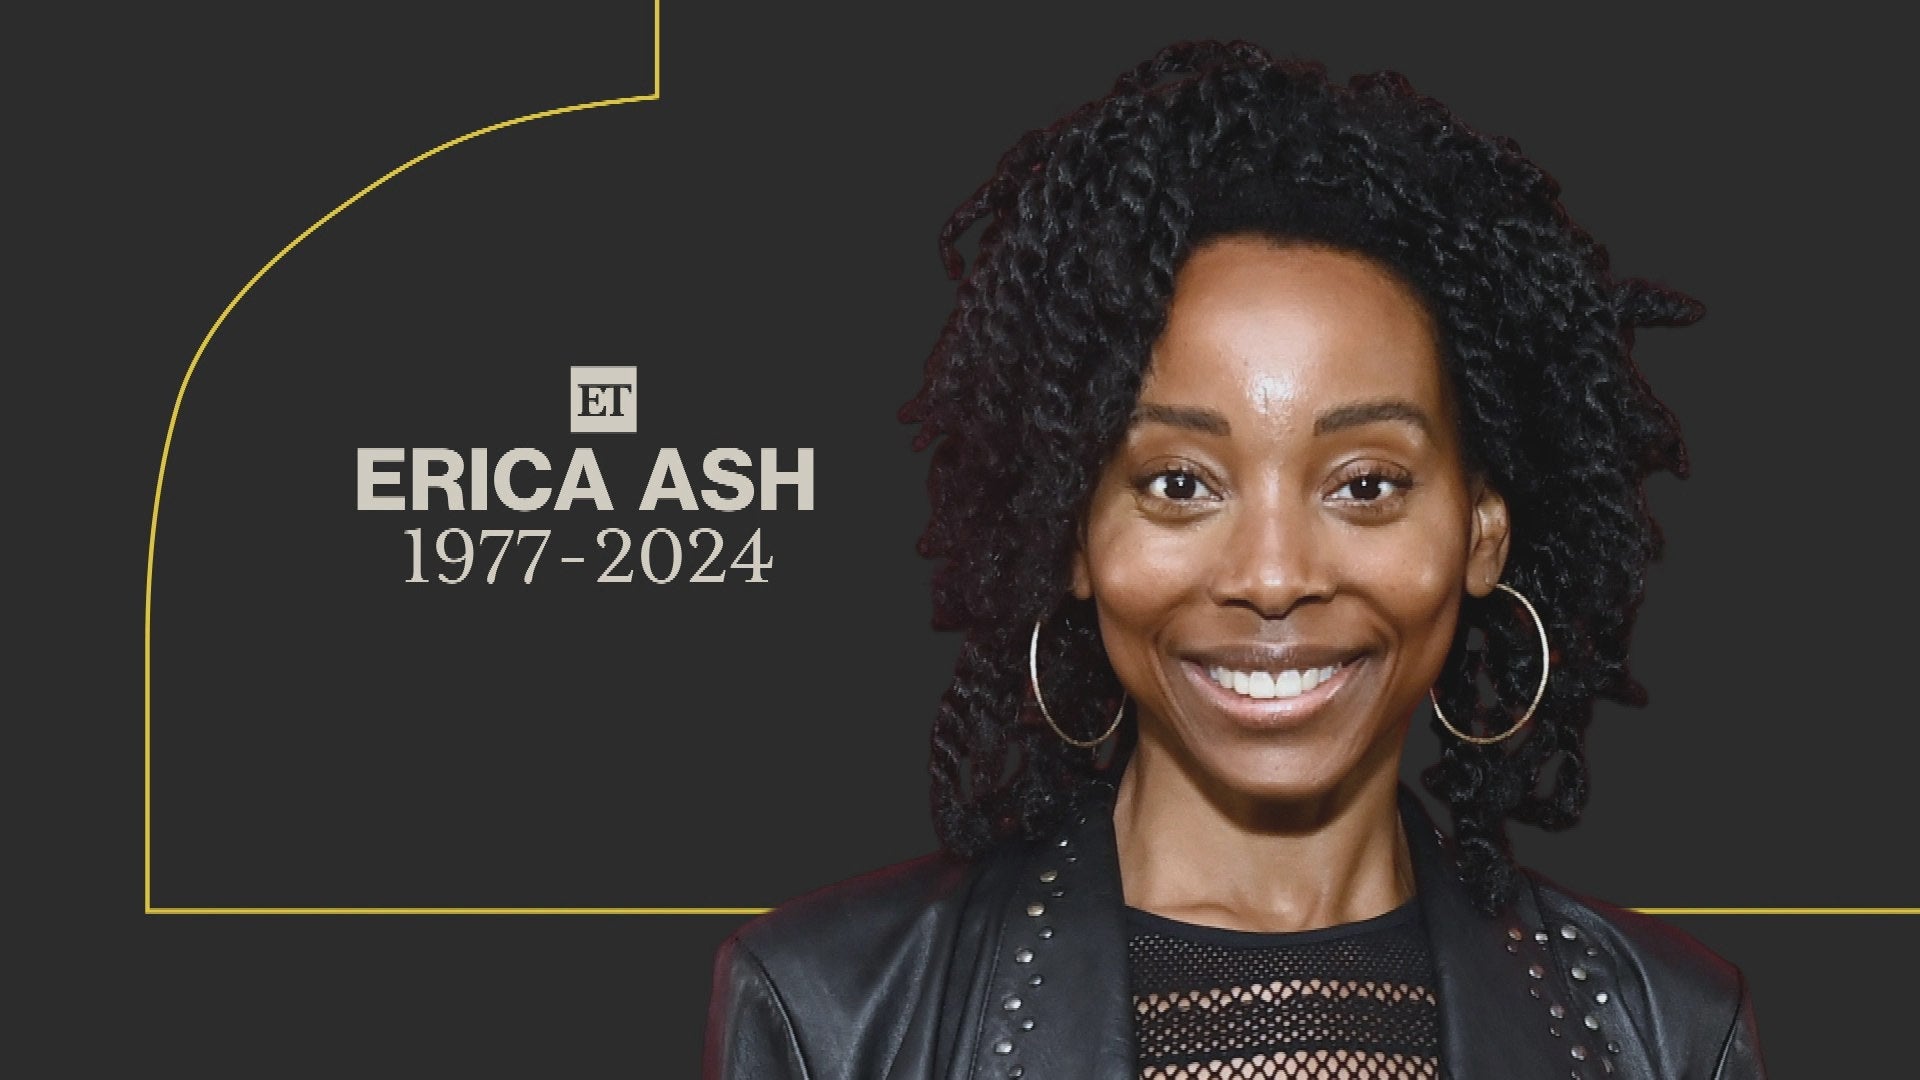 Erica Ash, 'MADtv' Actress, Dead at 46